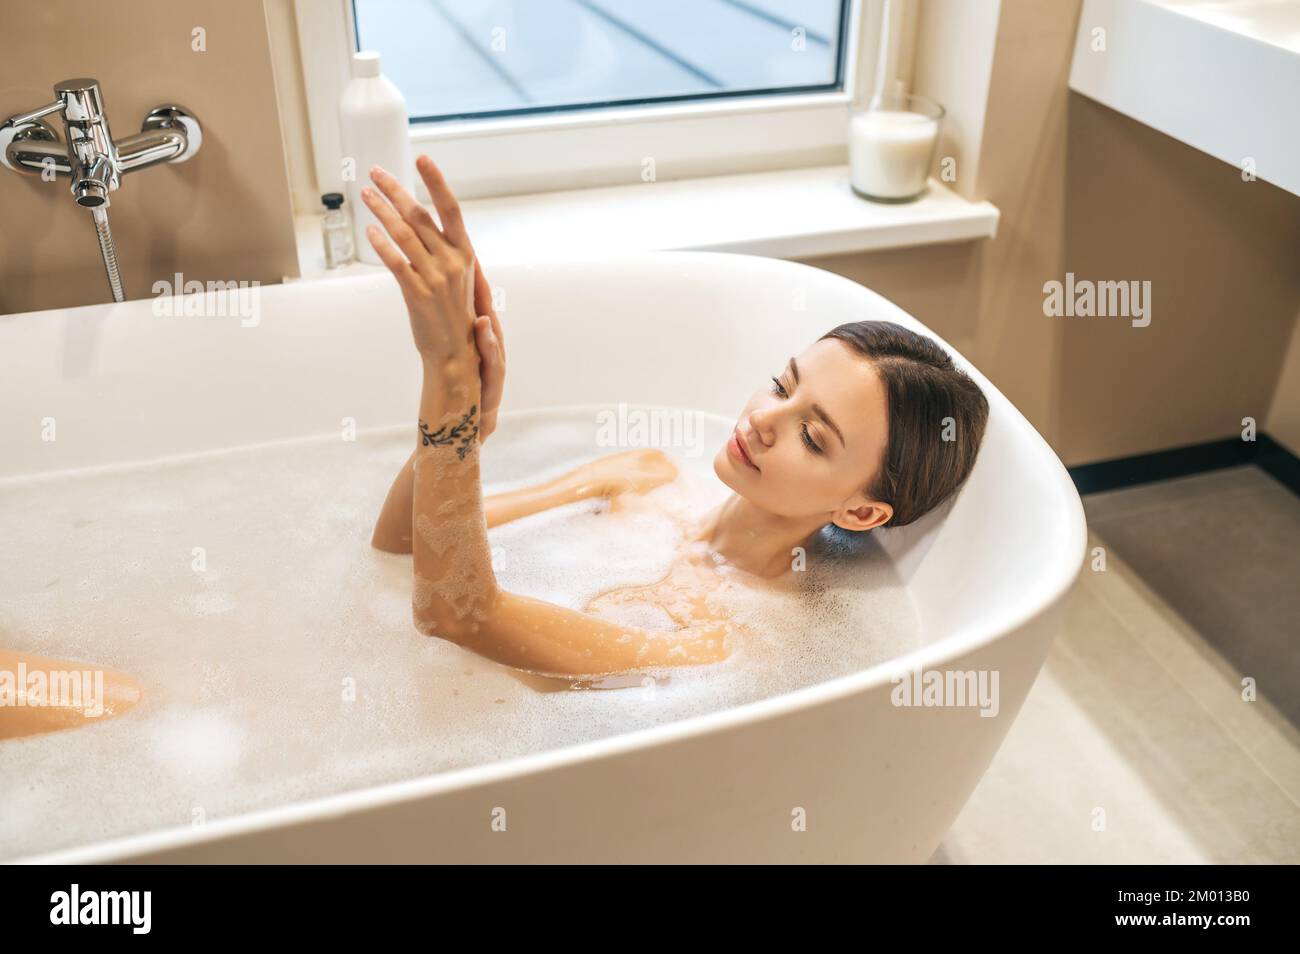 Calm lovely young woman lying in the bath and spreading soapy foam over her body. Stock Photo